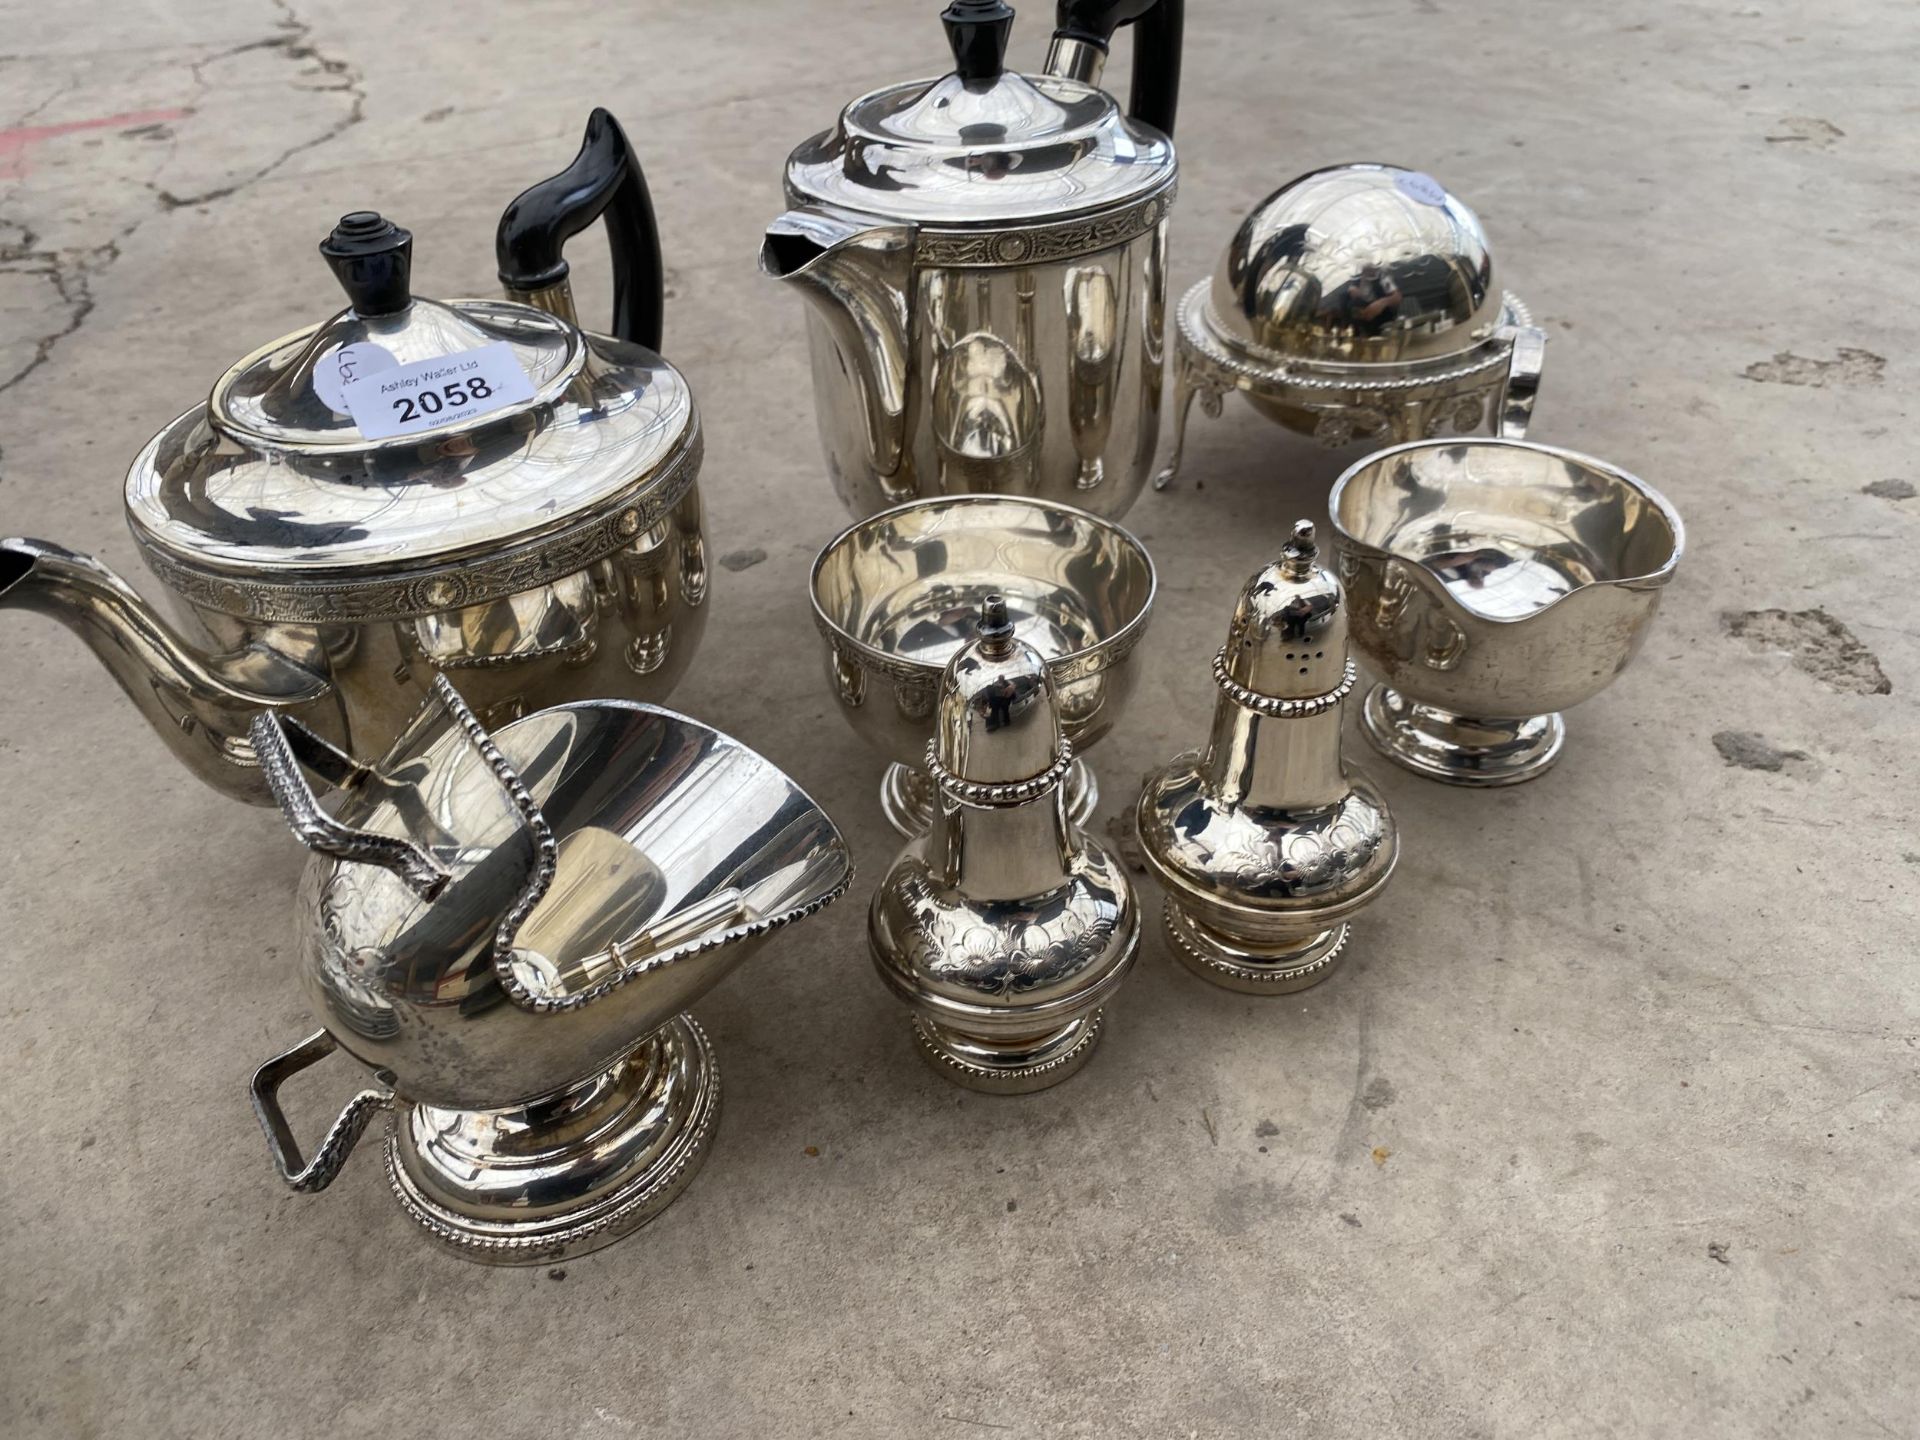 AN ASSORTMENT OF SILVER PLATED ITEMS TO INCLUDE A TEAPOT, COFFEE POT, SUGAR BOWL AND MILK JUG ETC - Image 2 of 3